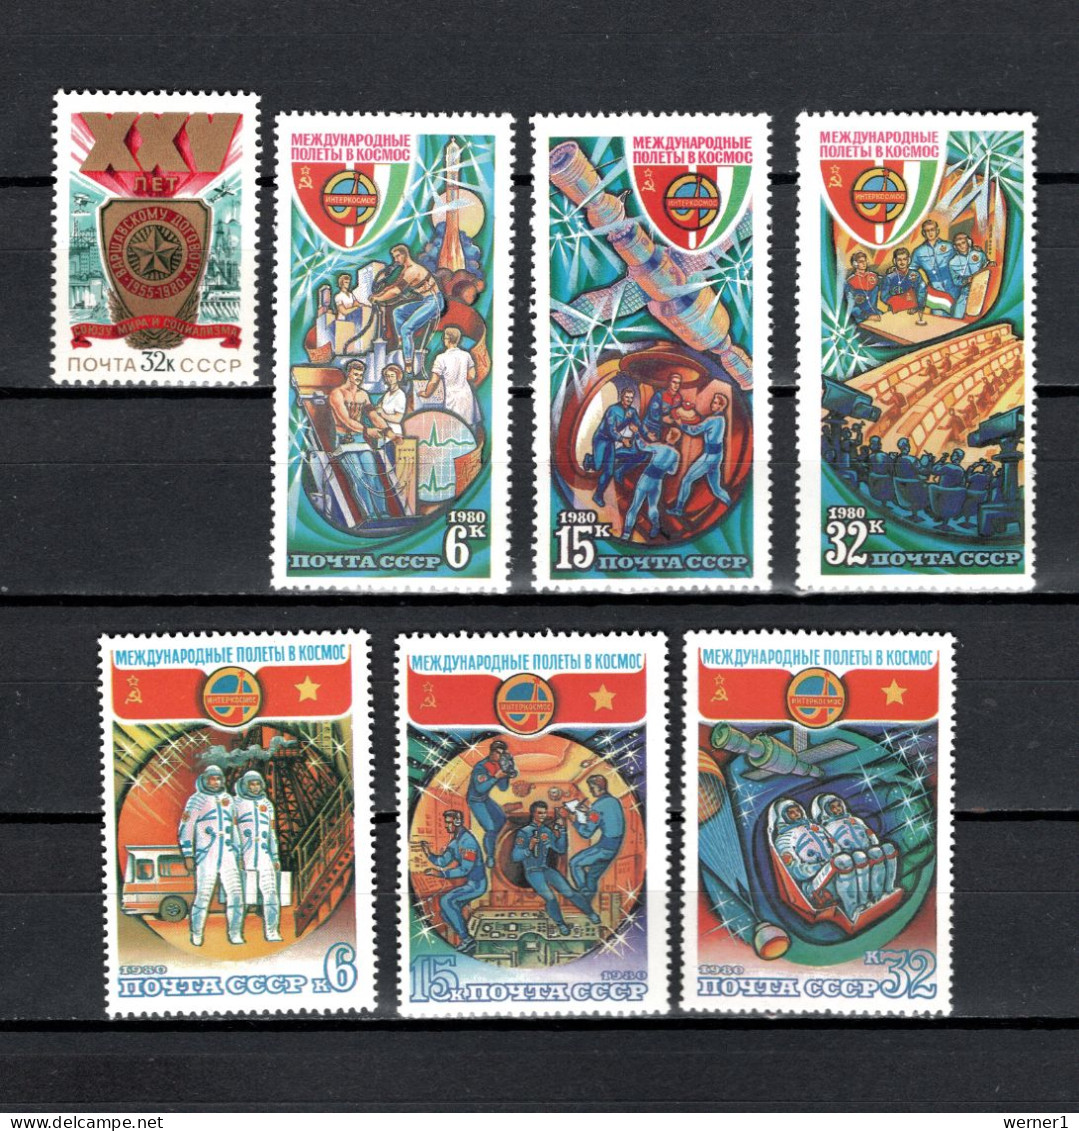 USSR Russia 1980 Space, Warsaw Treaty, Interkosmos 7 Stamps MNH - Russie & URSS